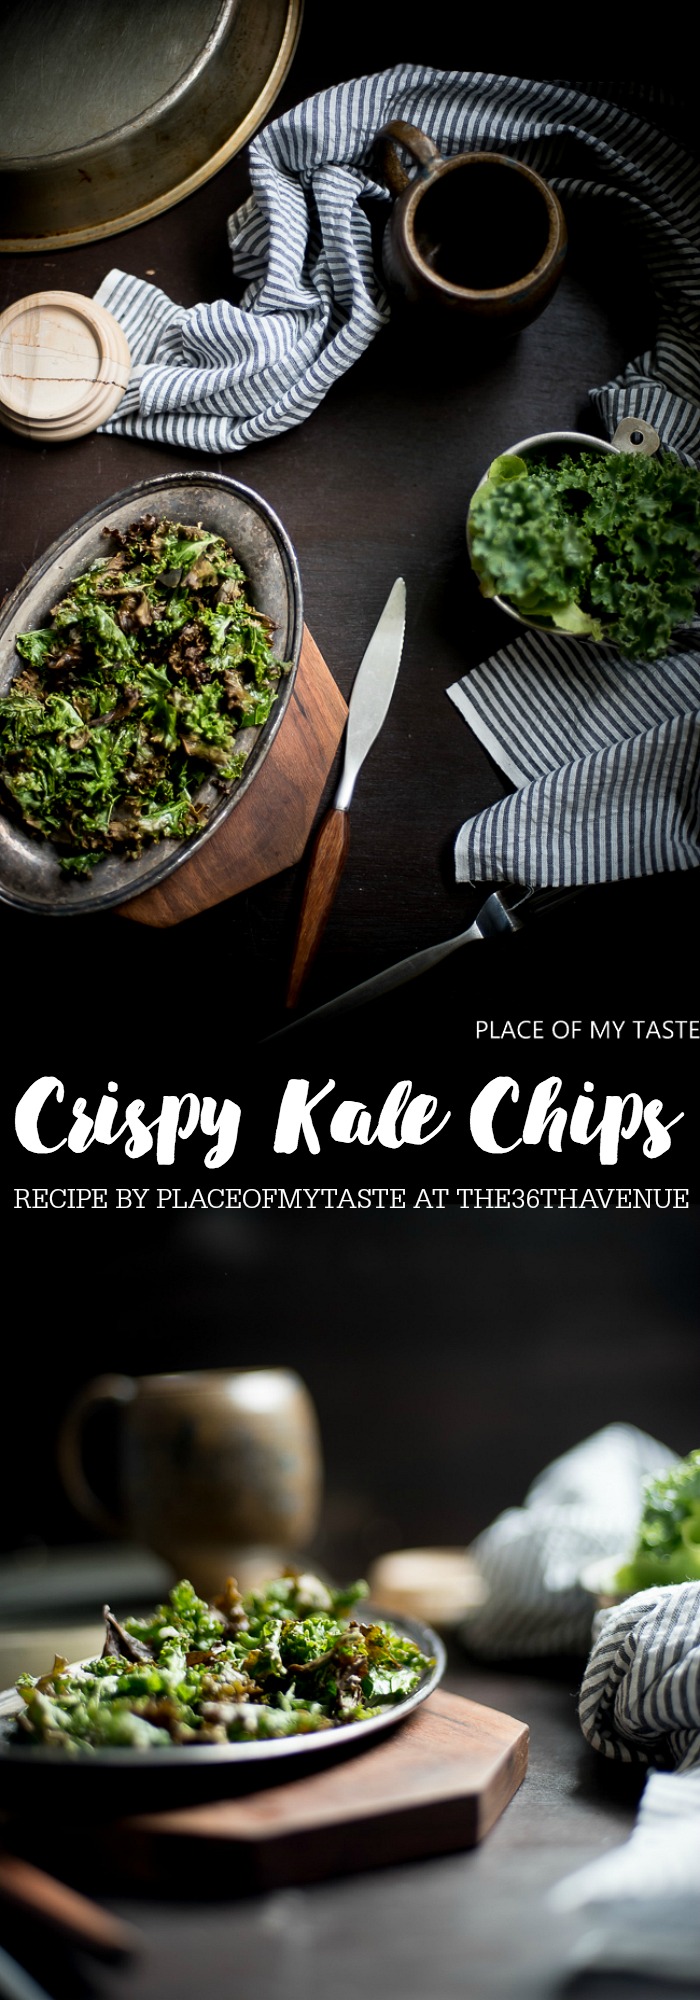 Kale is a fantastic source of many vitamins. These Crispy Kale Chips is one of the easiest snacks to make! Also makes the perfect appetizer. So delicious!